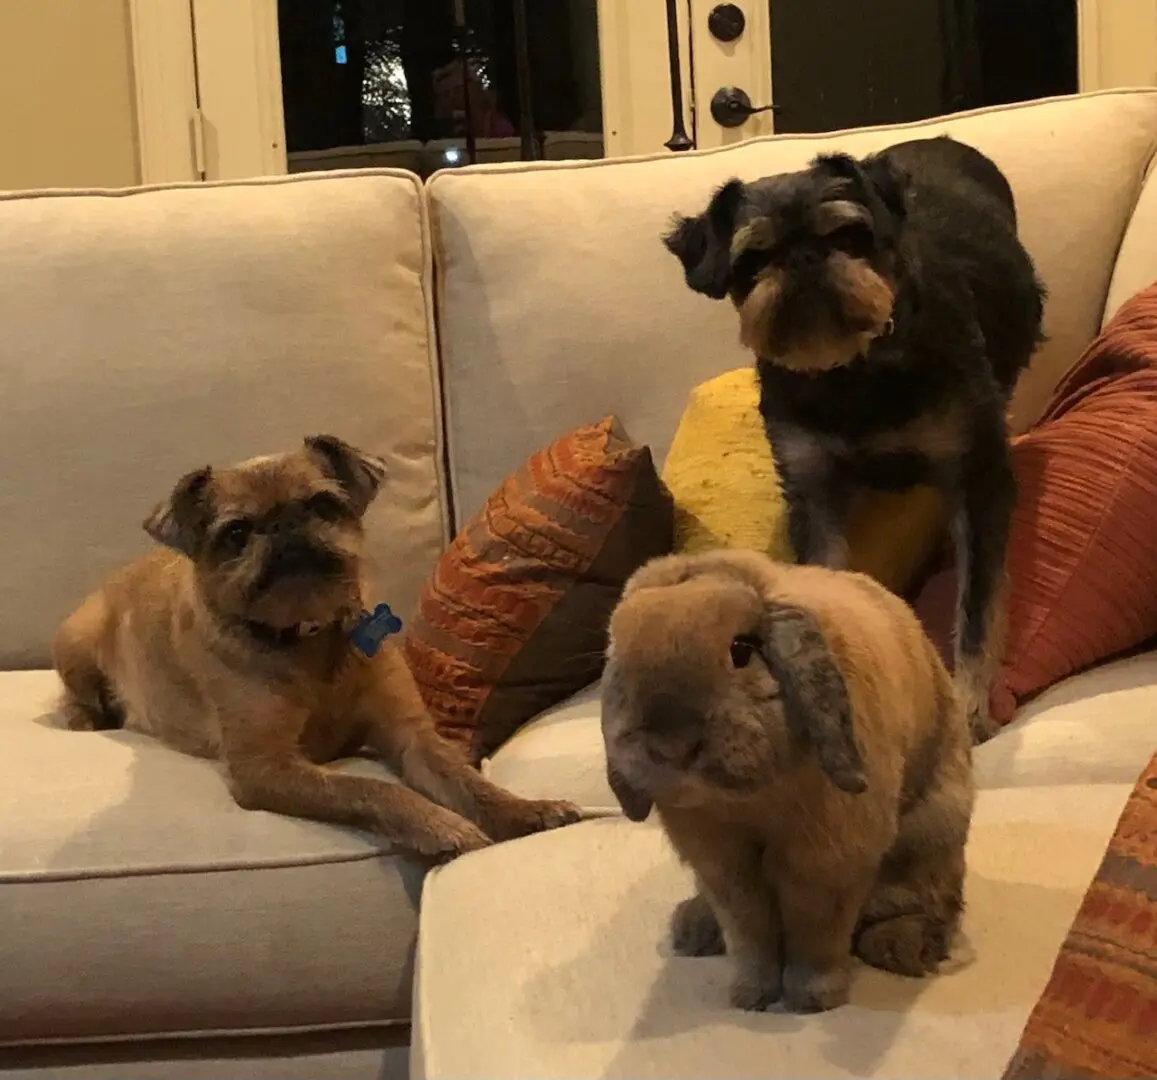 Two Brussels Griffon and a rabbit on a couch